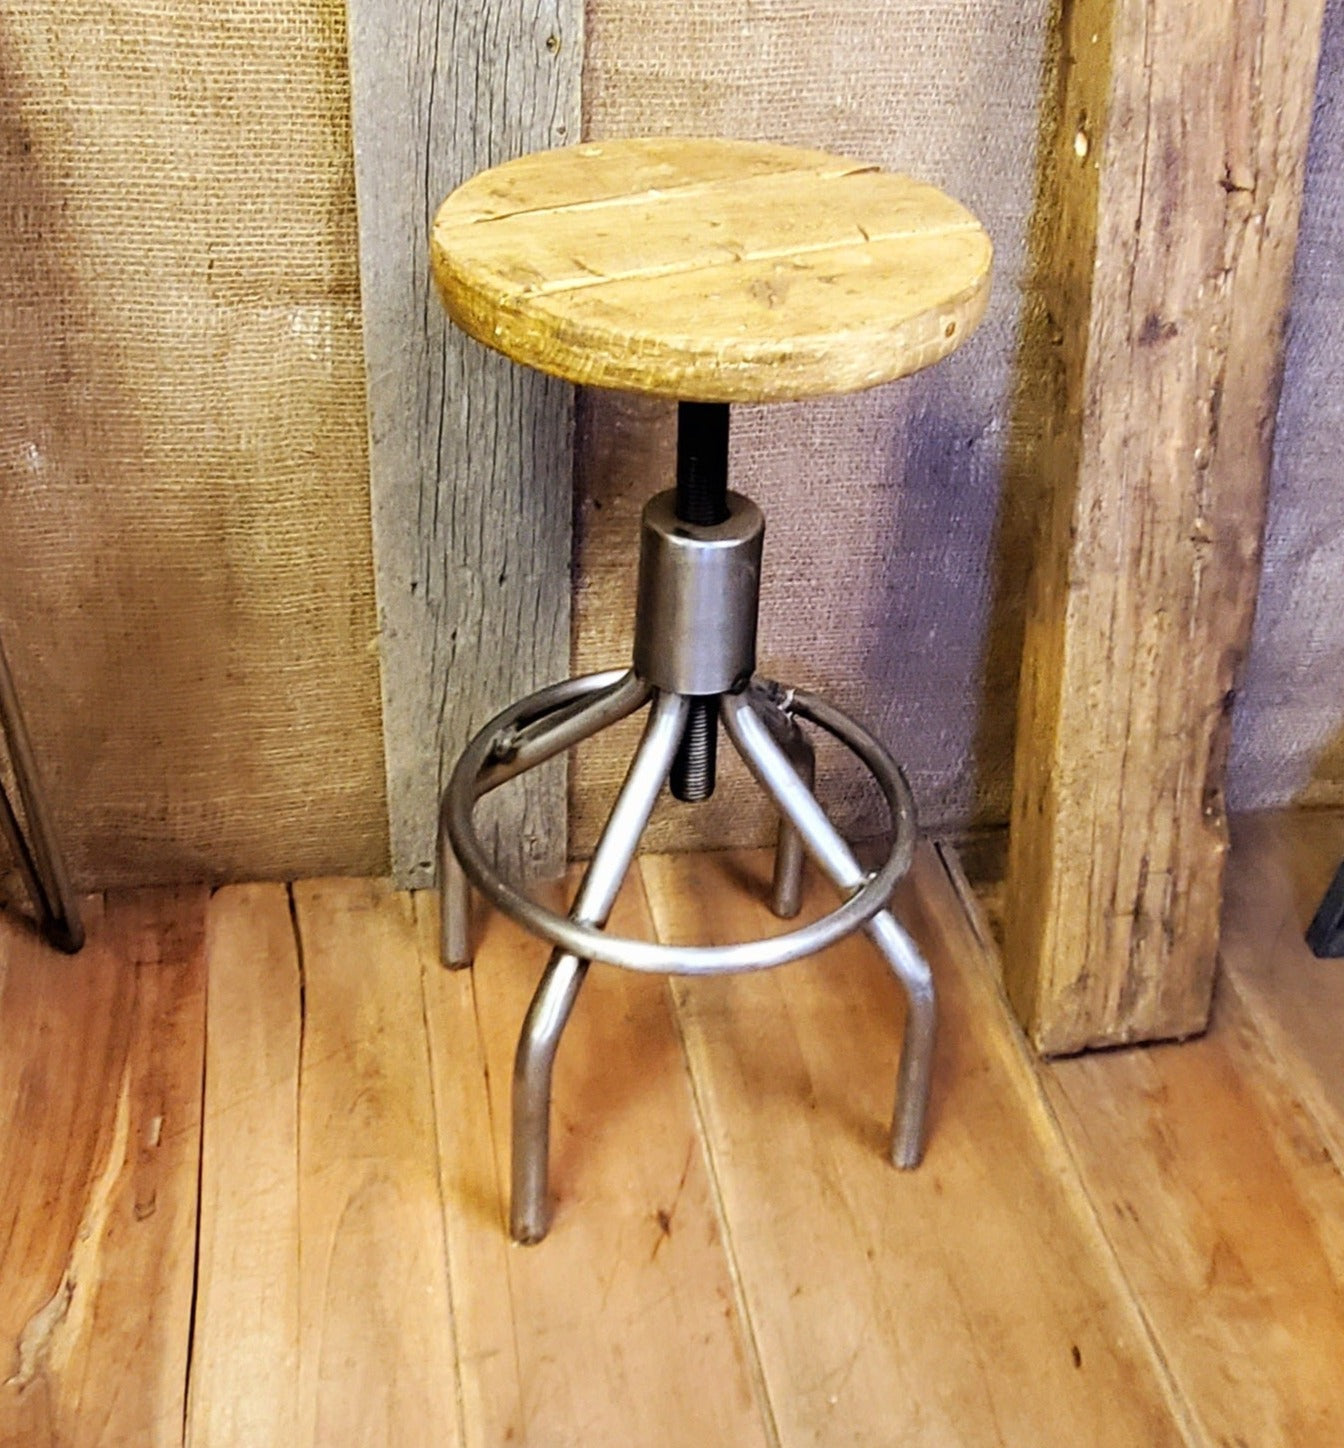 The Henderson Round Base Tubular adjustable Height Stool with Wood top